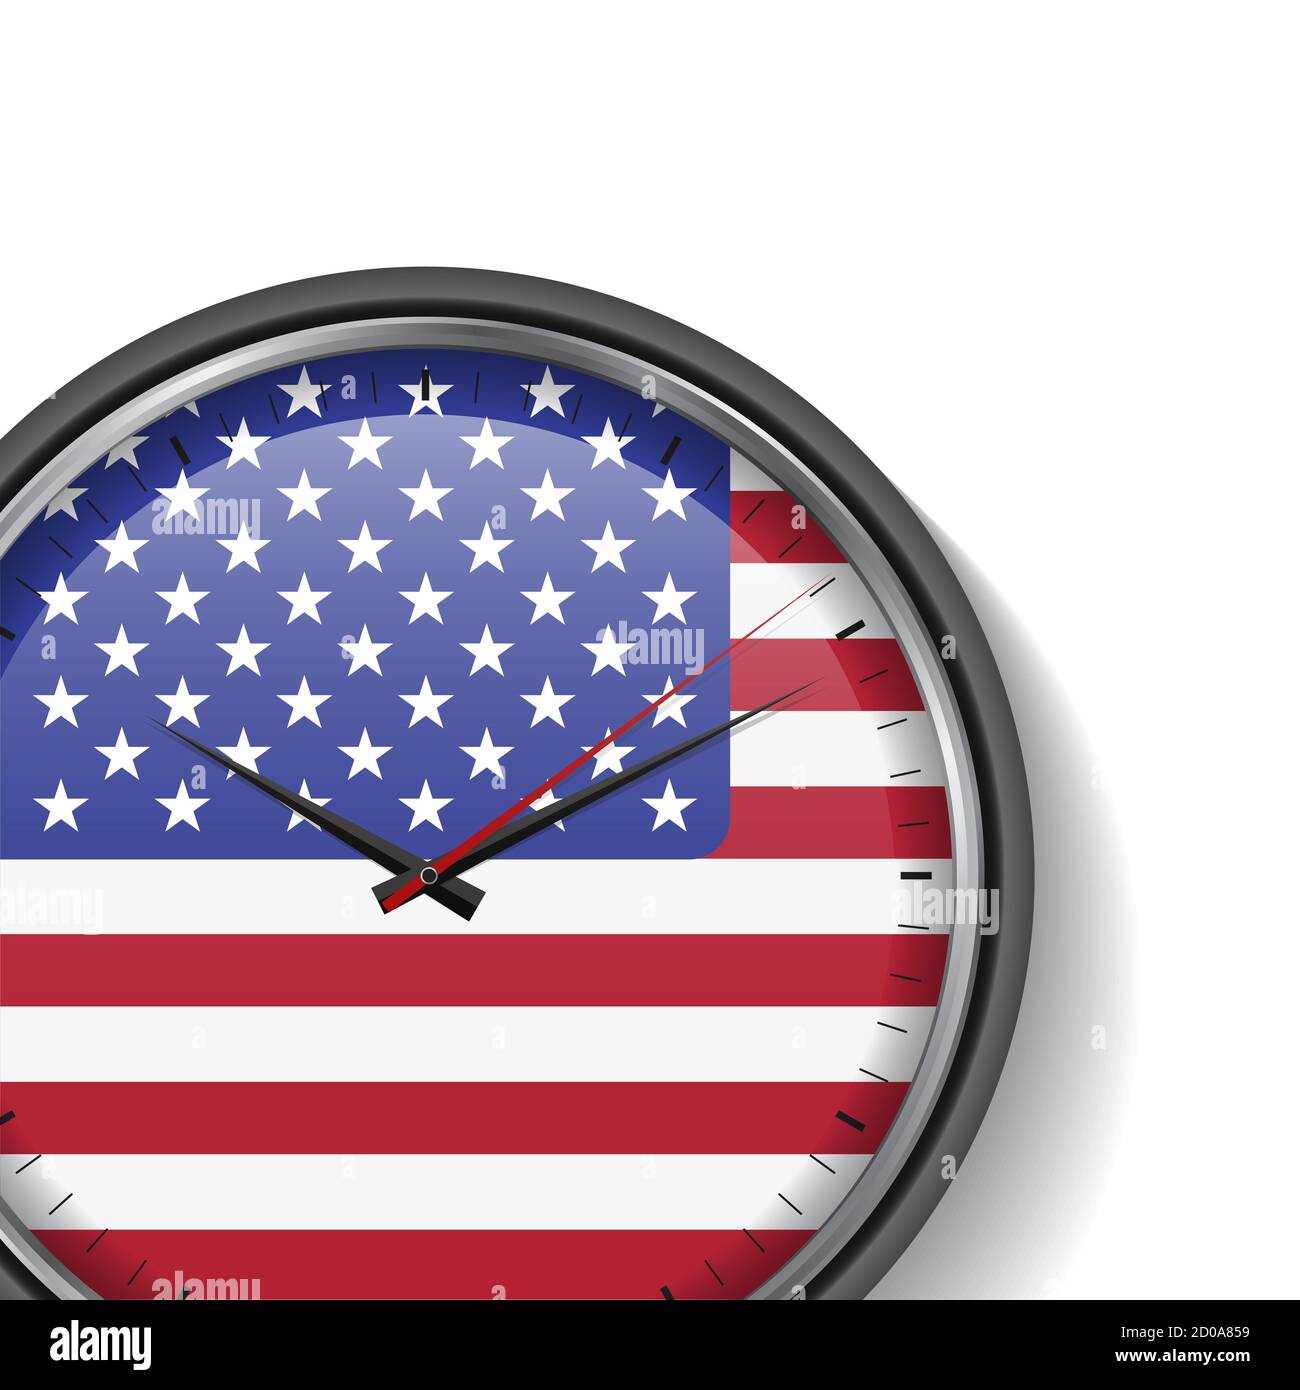 US flag clock with shadow on white background. Time to make a decision, America. illustration. Stock Photo